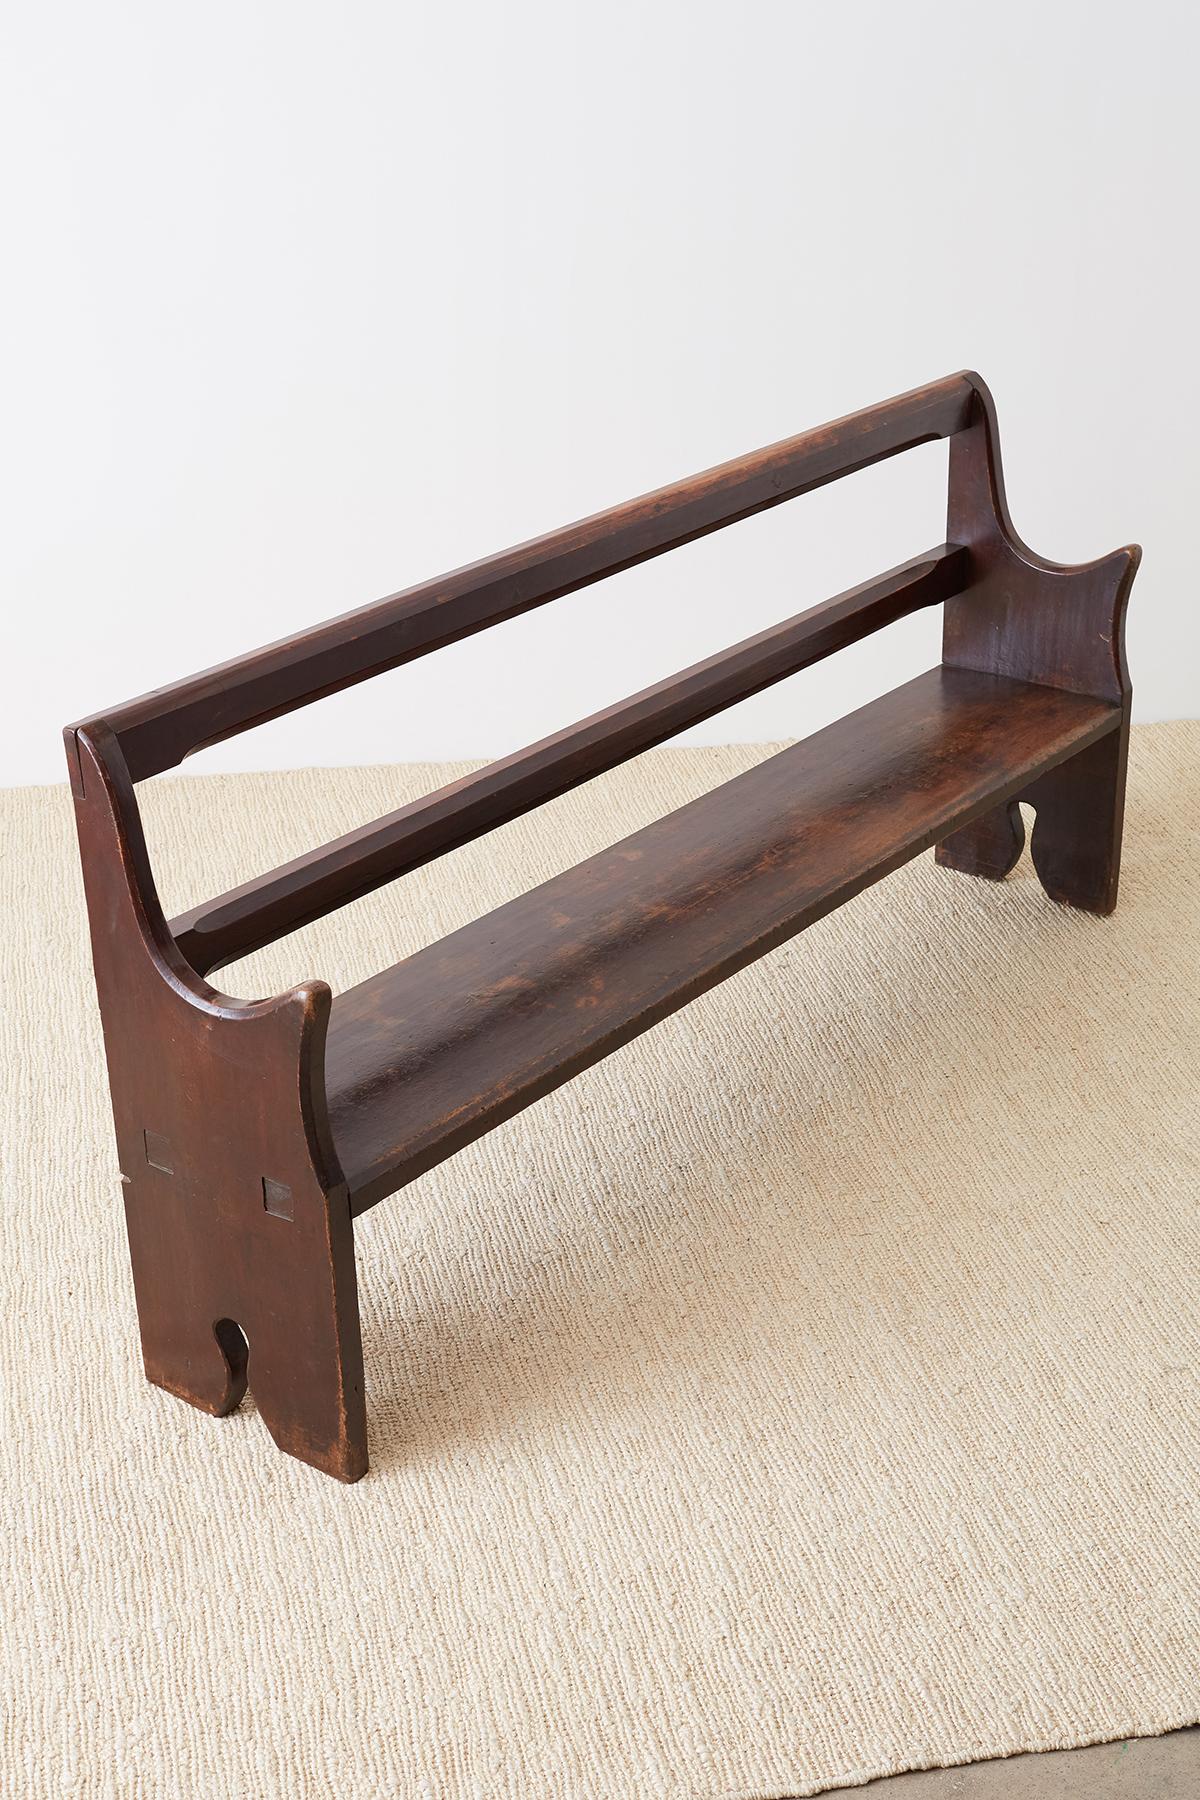 Early 20th Century Redwood Church Pew or Bench 2